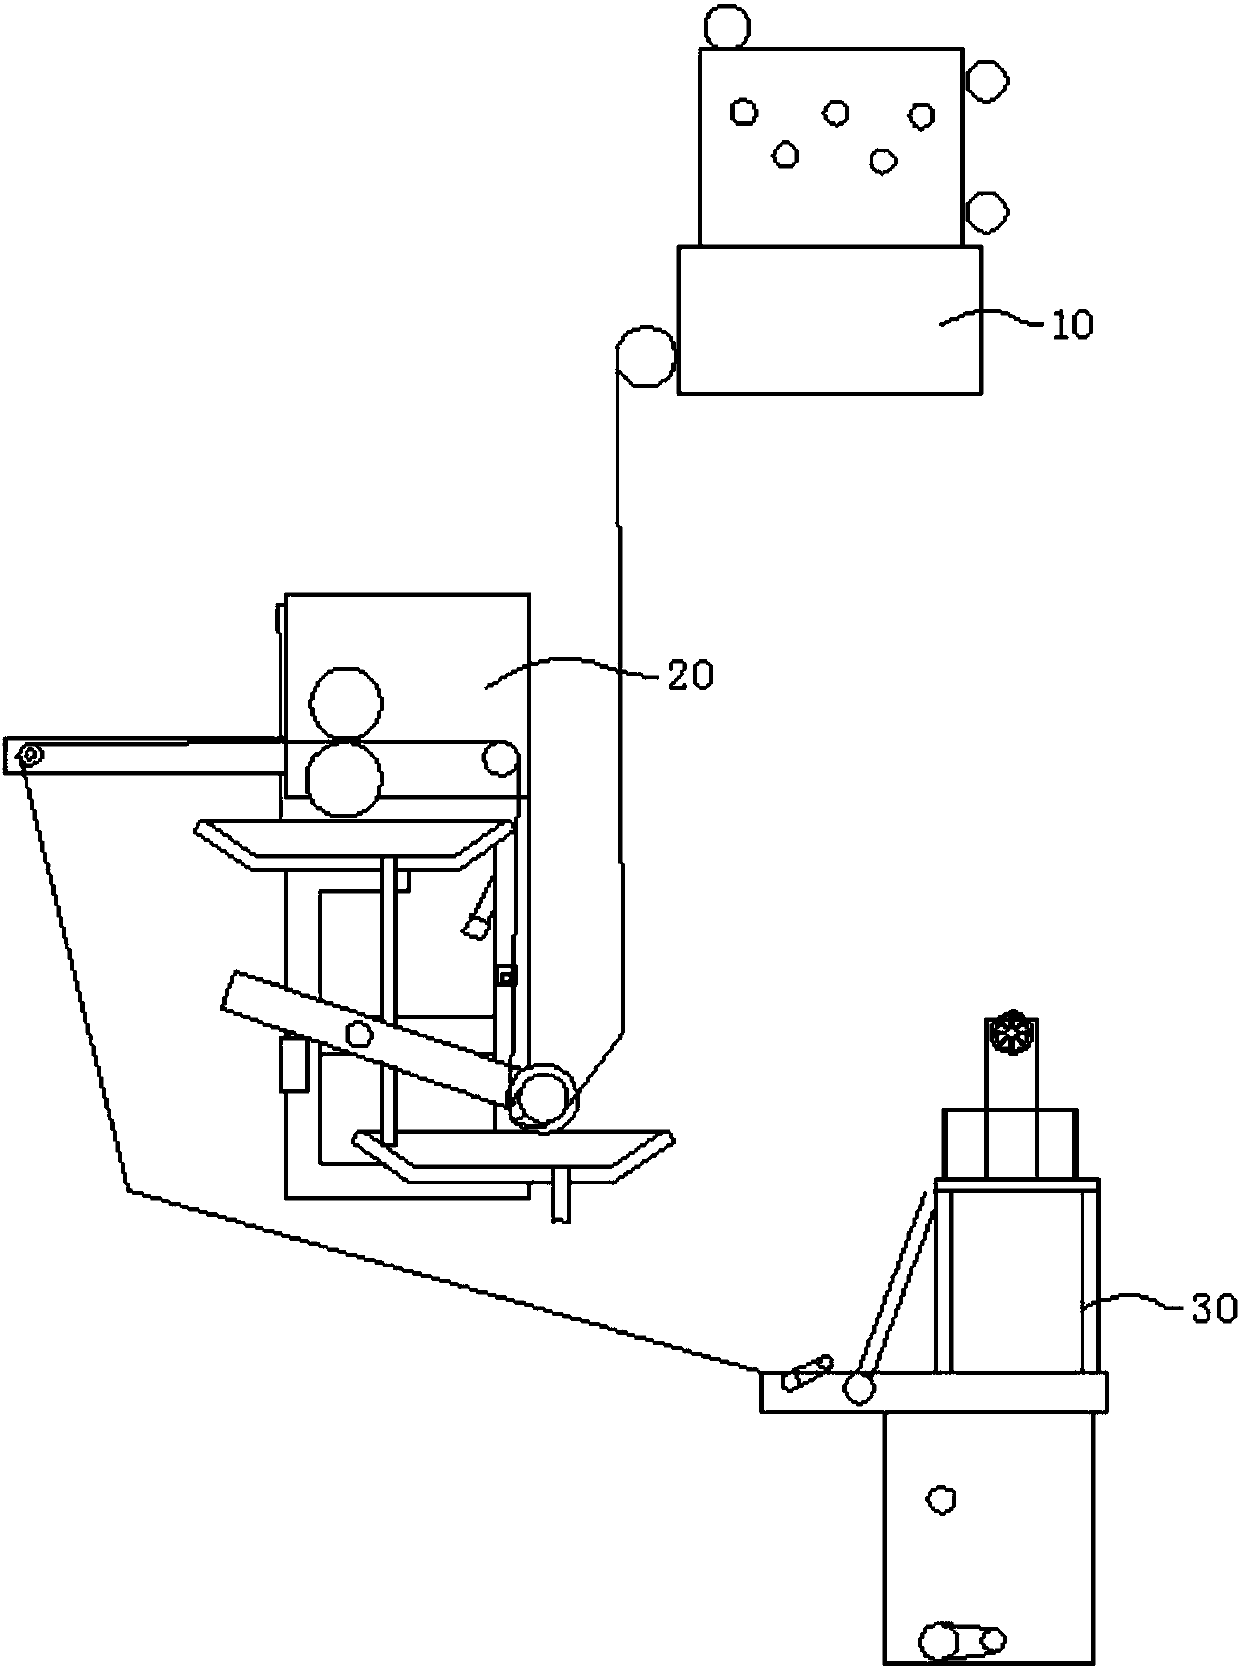 System for fabric printing and dyeing